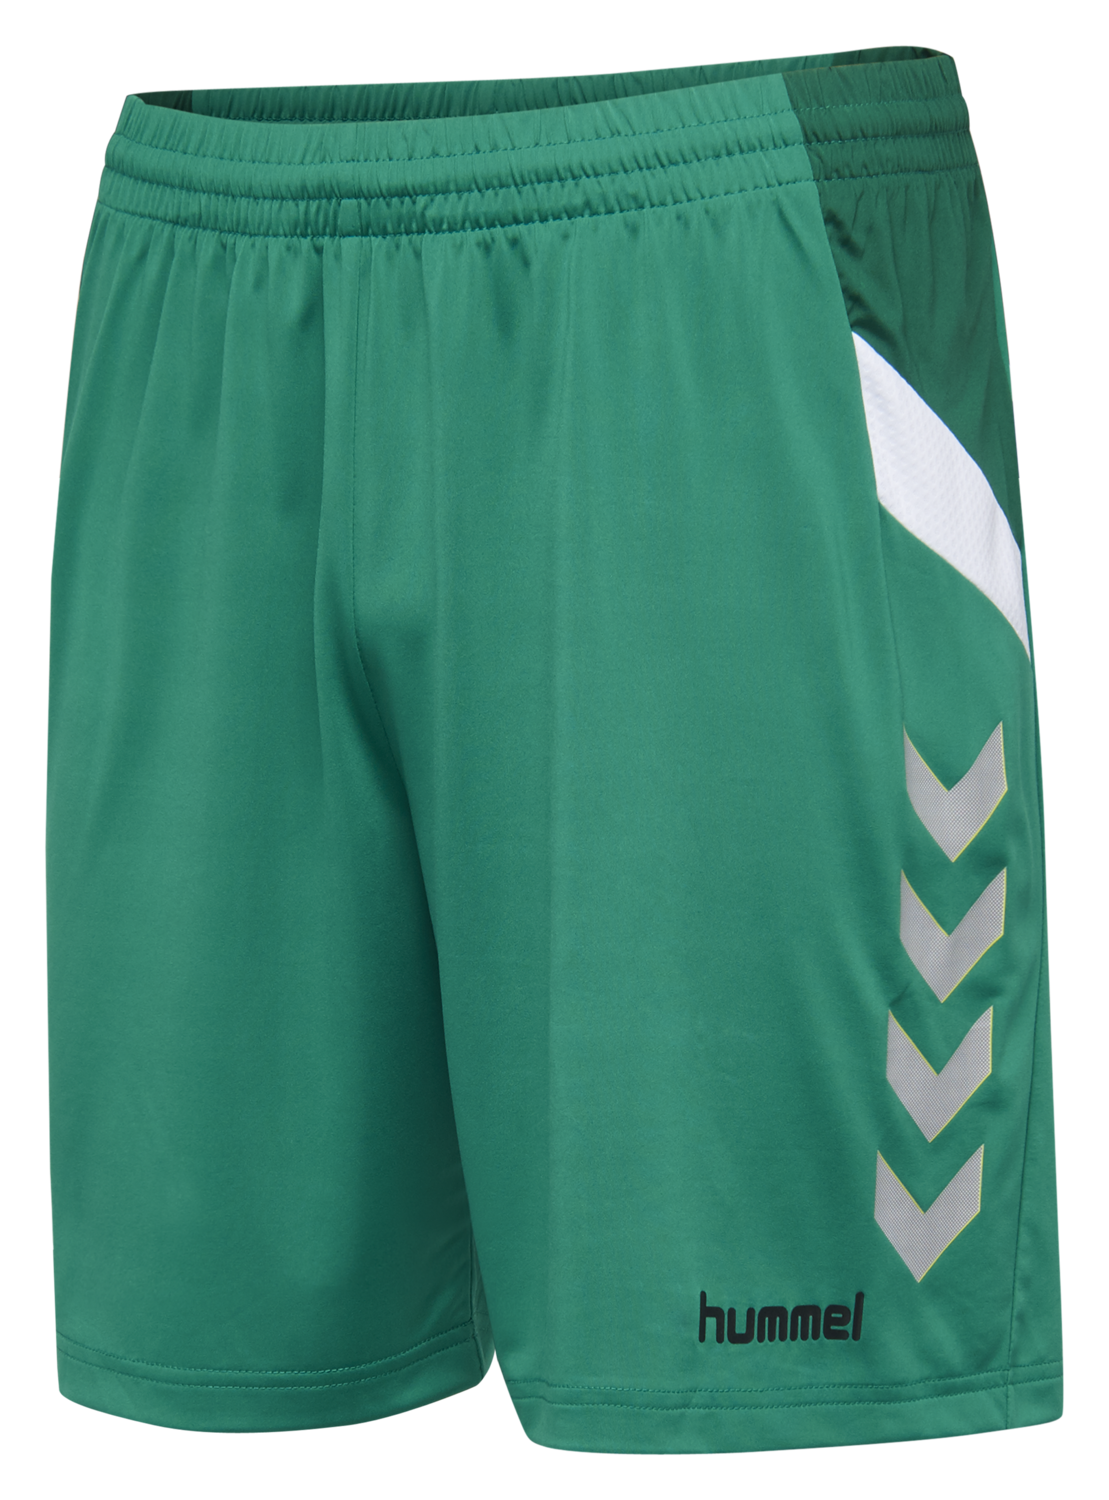 Details about   Hummel Football Soccer Kids Sports Training Authentic Poly Shorts Regular Fit 